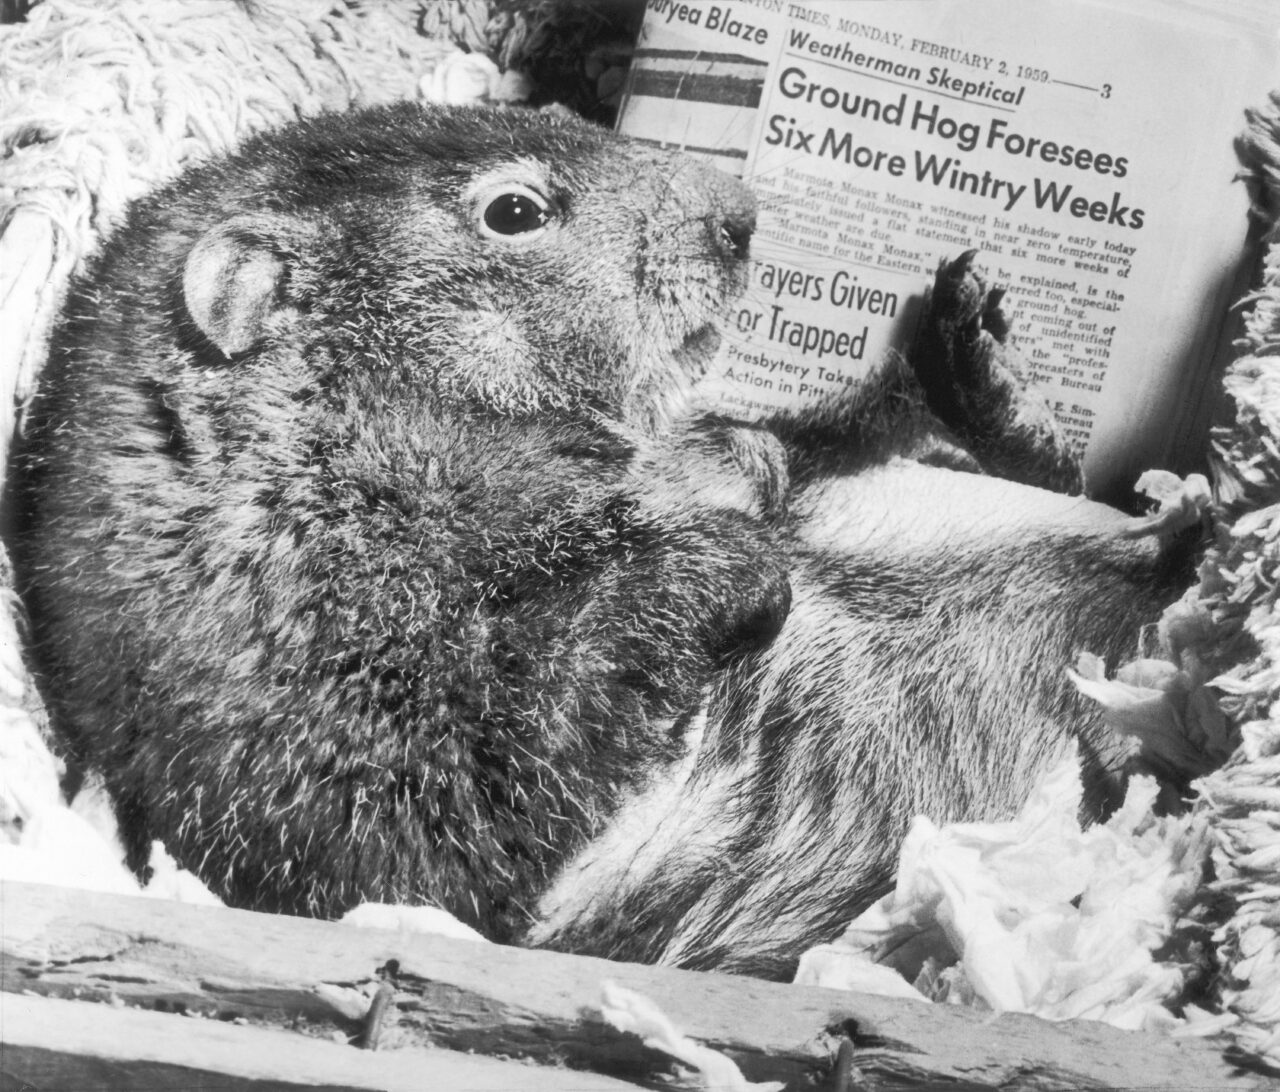 FILE - Mr. Groundhog relaxes in his bed, Feb. 3, 1959, in Scranton, Pa., after making his prediction. Appearing to scan the newspaper to check the facts is this frisky pet of Alex Jimoosky Jr. The arrival of annual Groundhog Day celebrations Friday, Feb. 2, 2024, will draw thousands of people to see celebrity woodchuck Phil at Gobbler's Knob in Punxsutawney, Pa. — an event that exploded in popularity after the 1993 Bill Murray movie. (AP Photo, File)